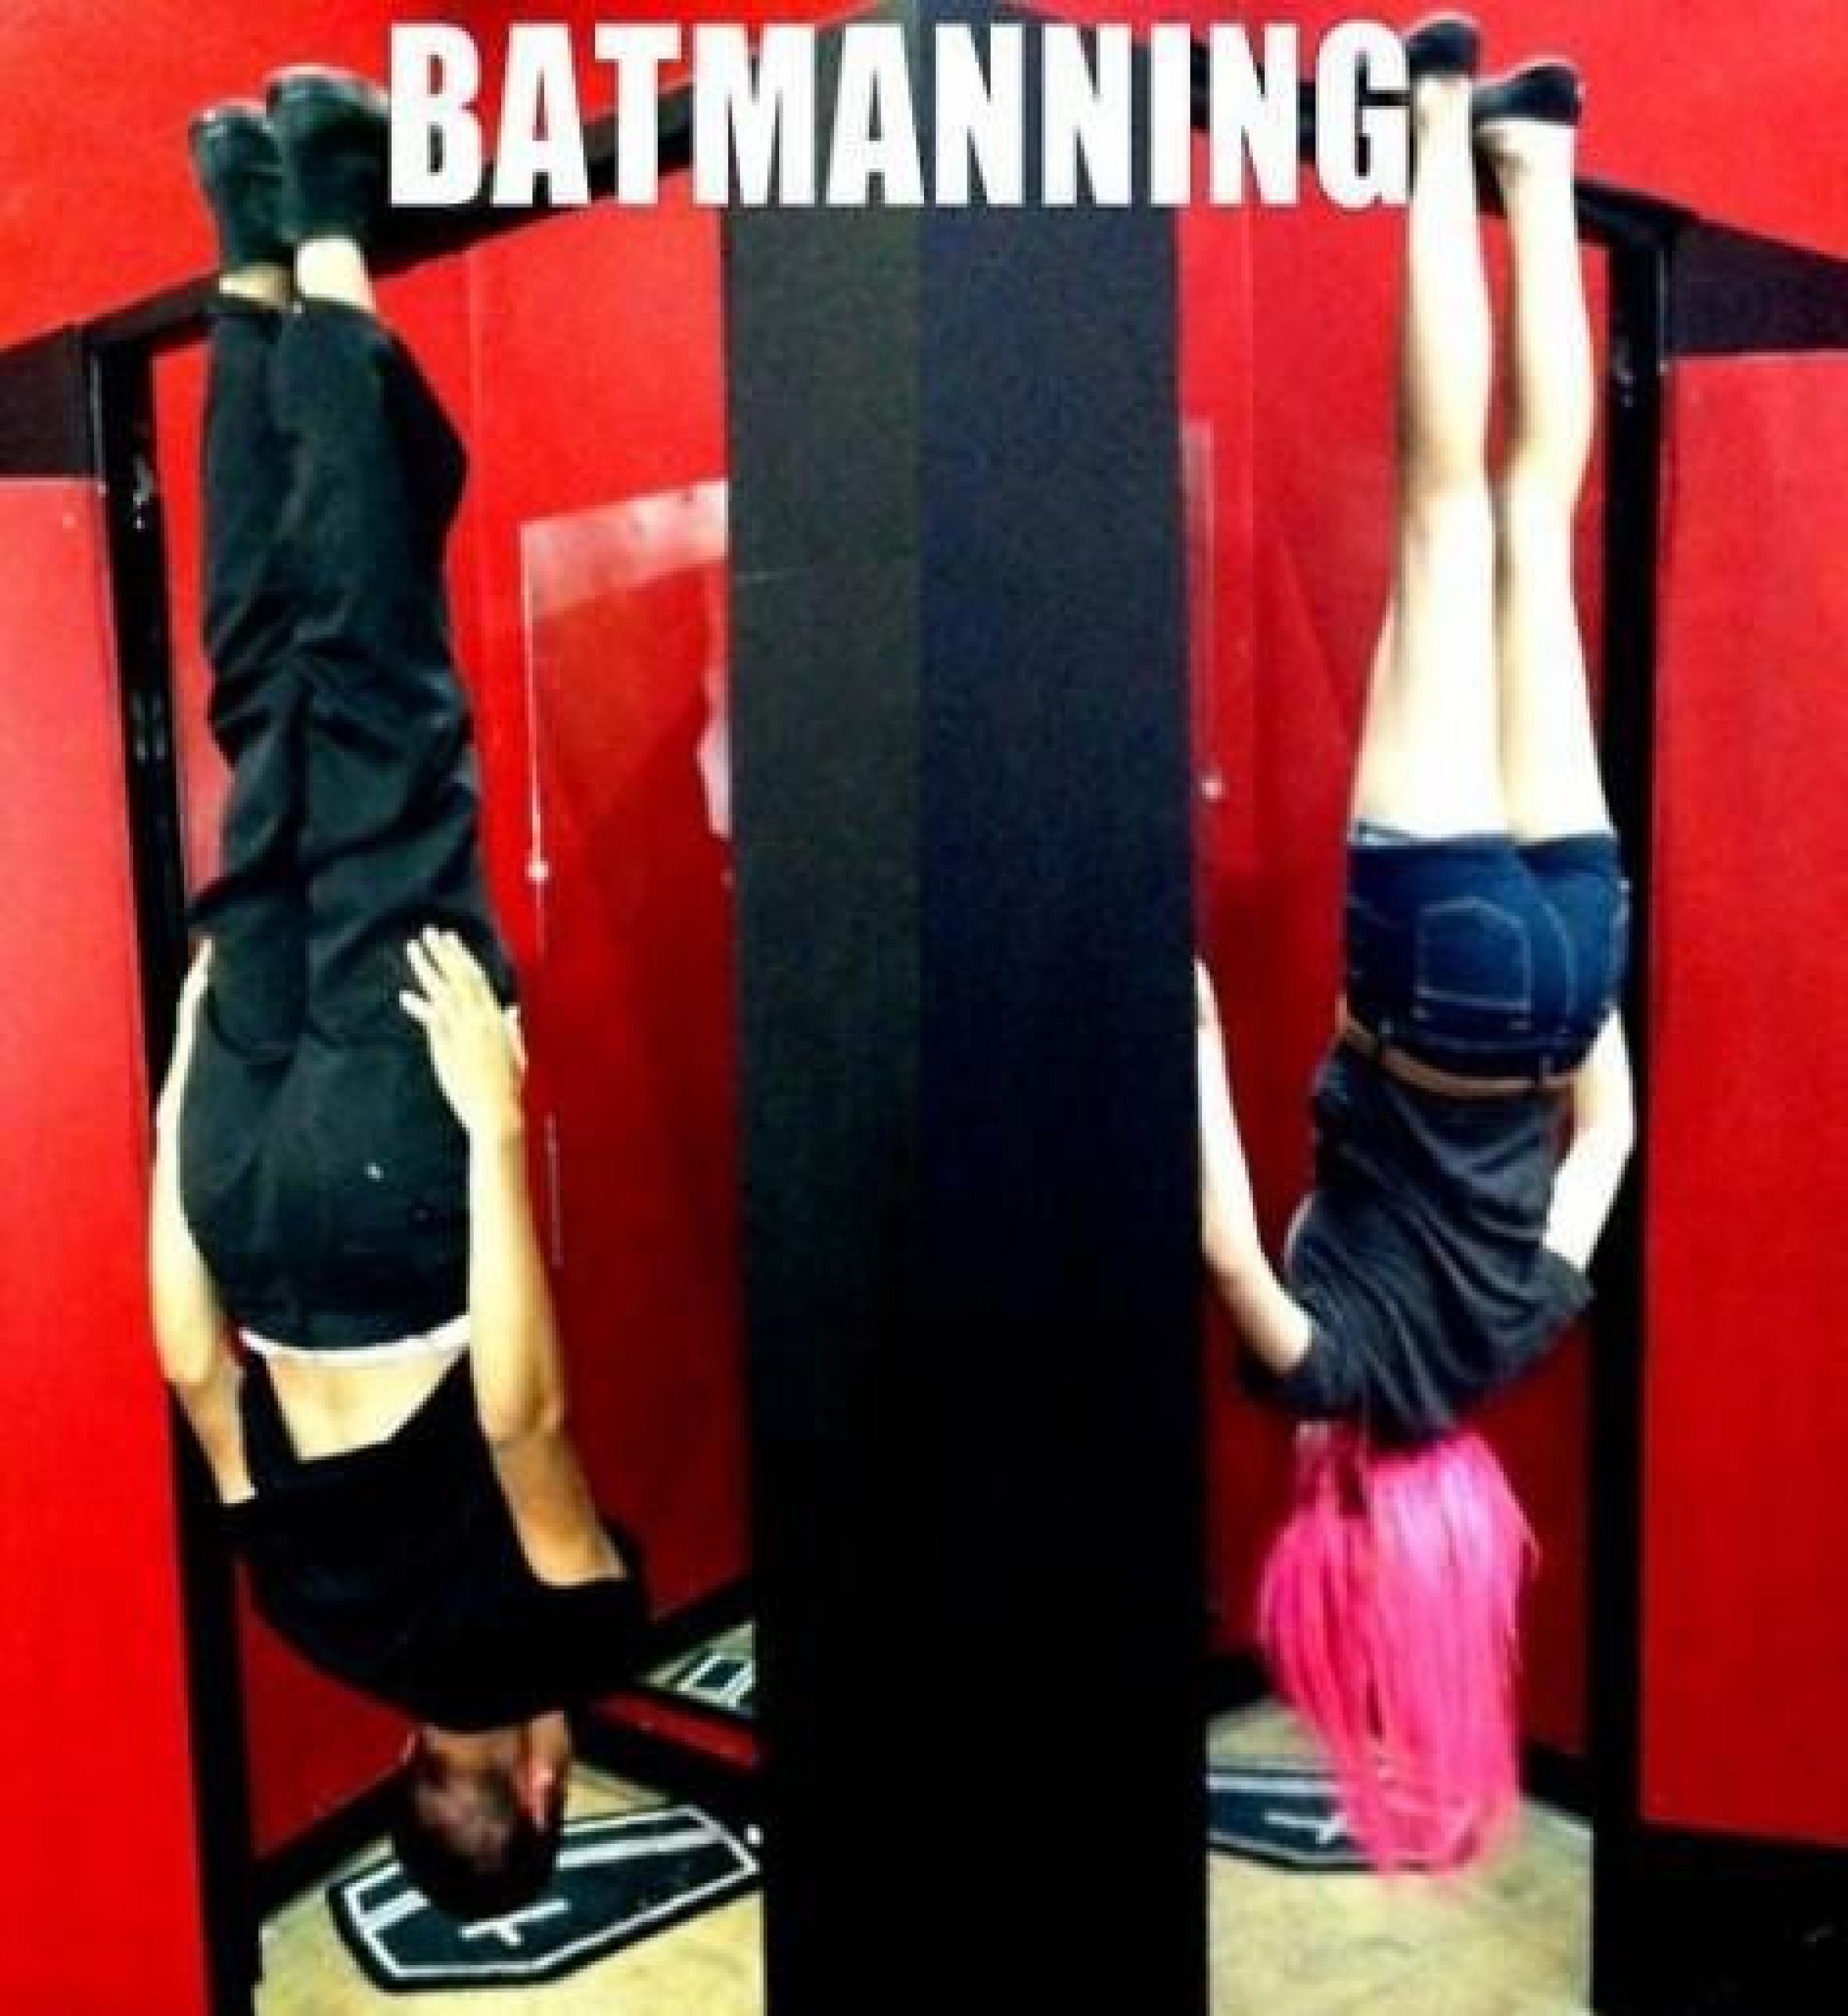 Planking, Owling, Horsemanning are Passe, Batmanning is Trendy Now